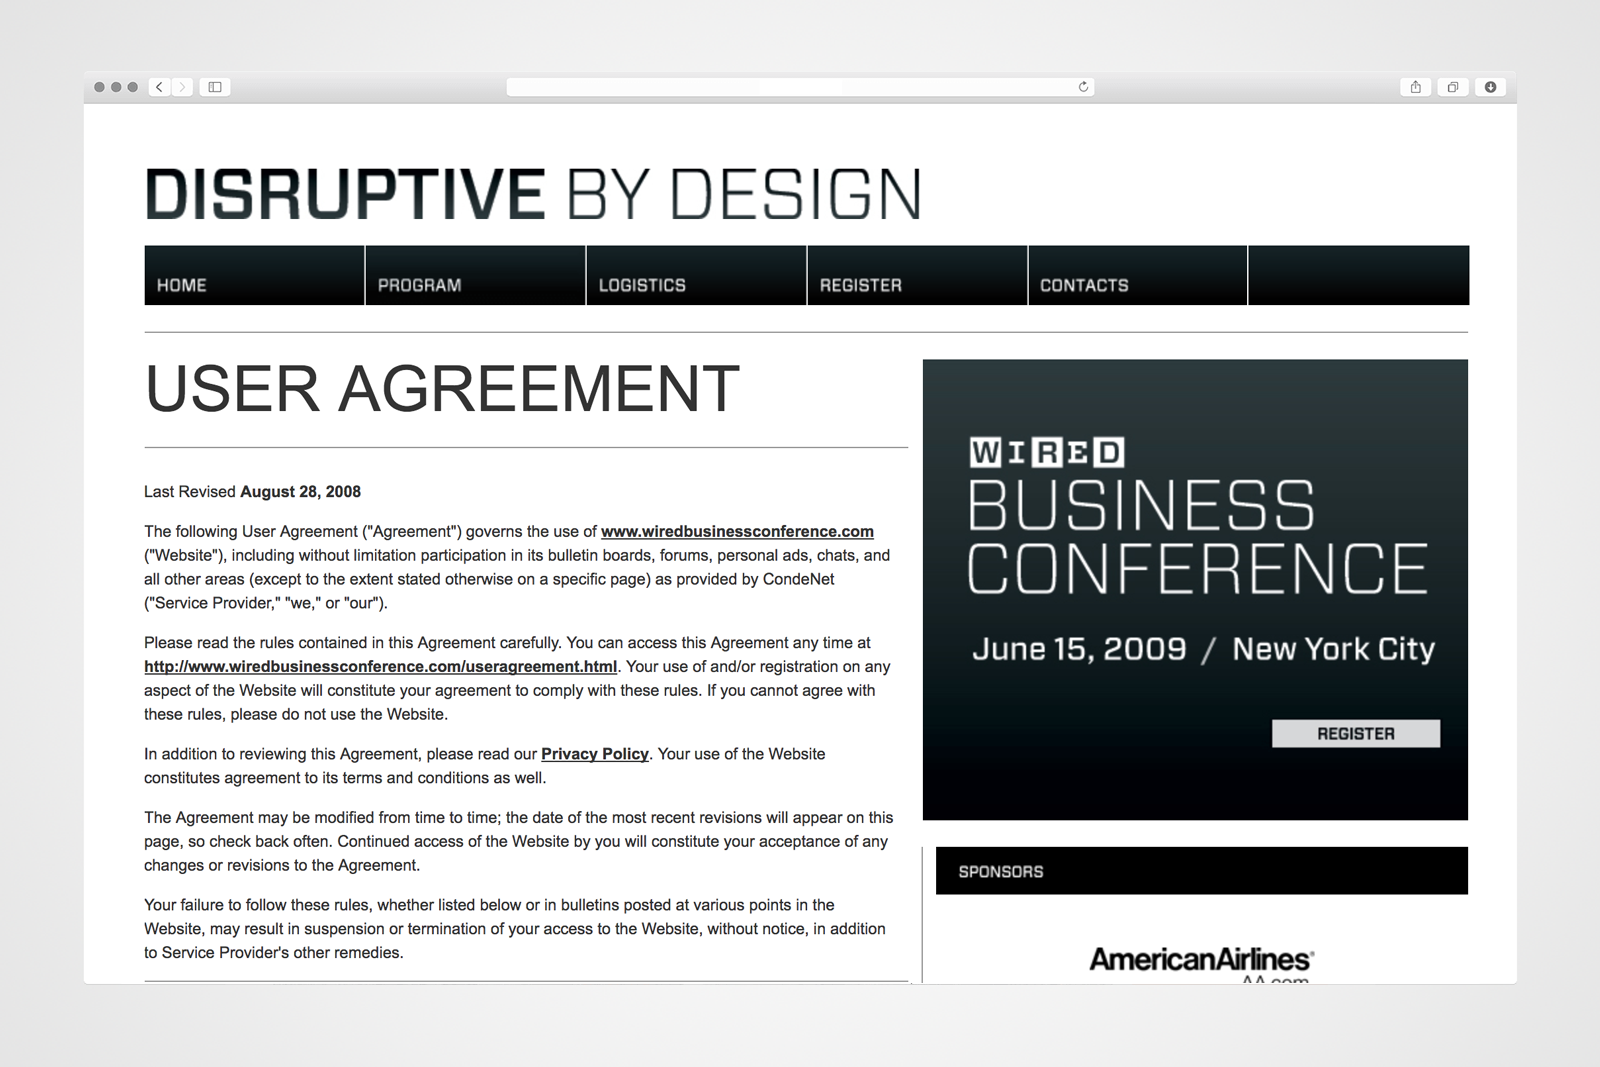 WIRED Disruptive by Design